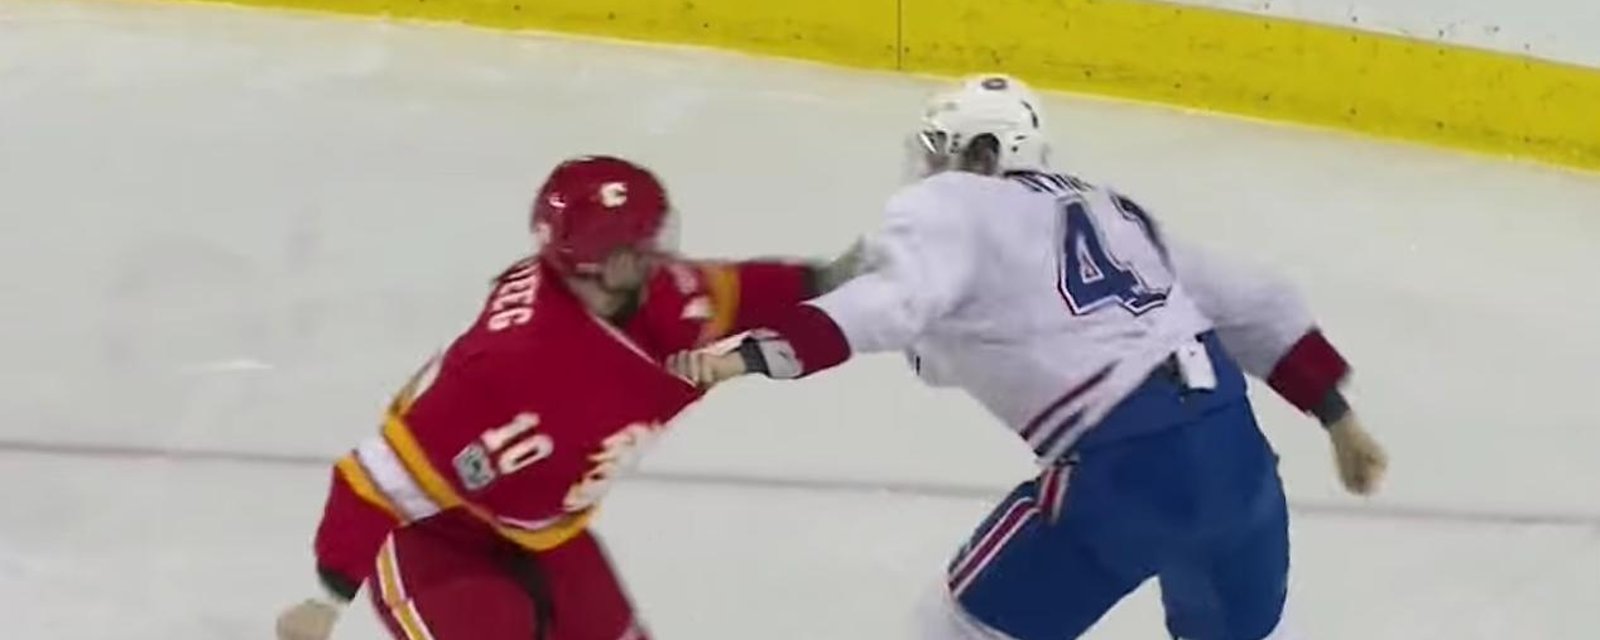 Former Flames gets his lunch handed to him. 